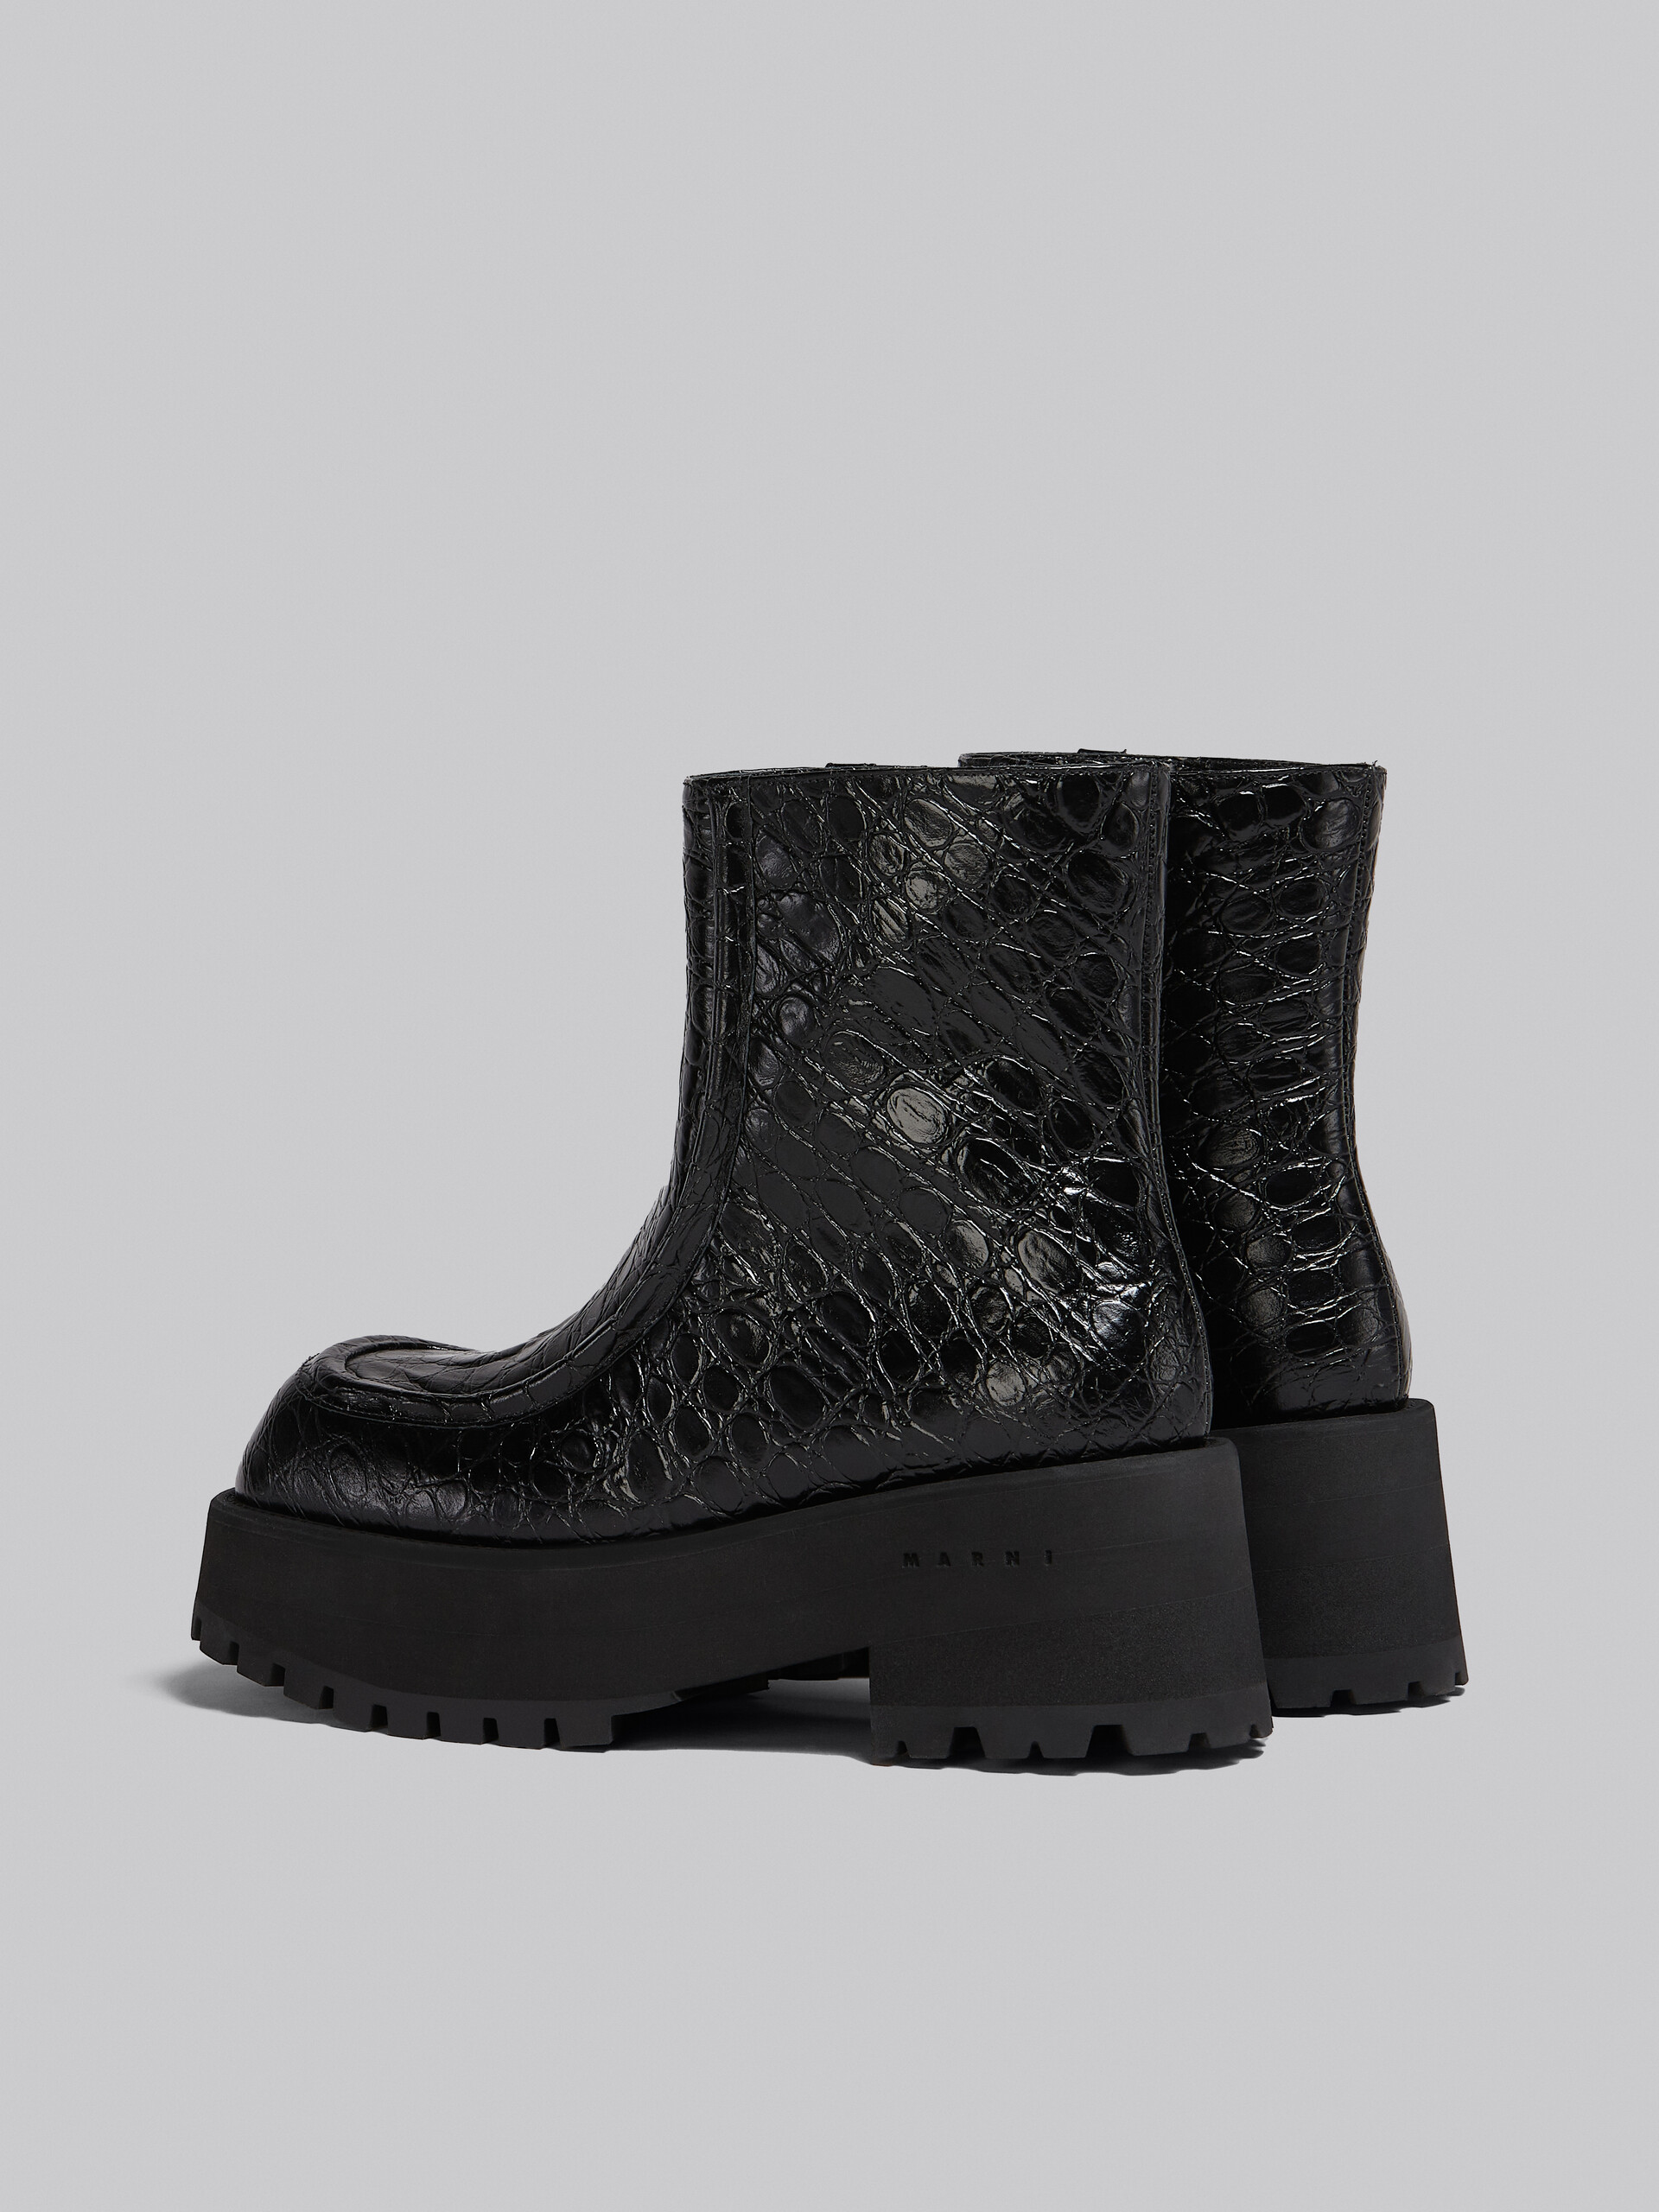 Ankle boot in black croco print leather - Boots - Image 3